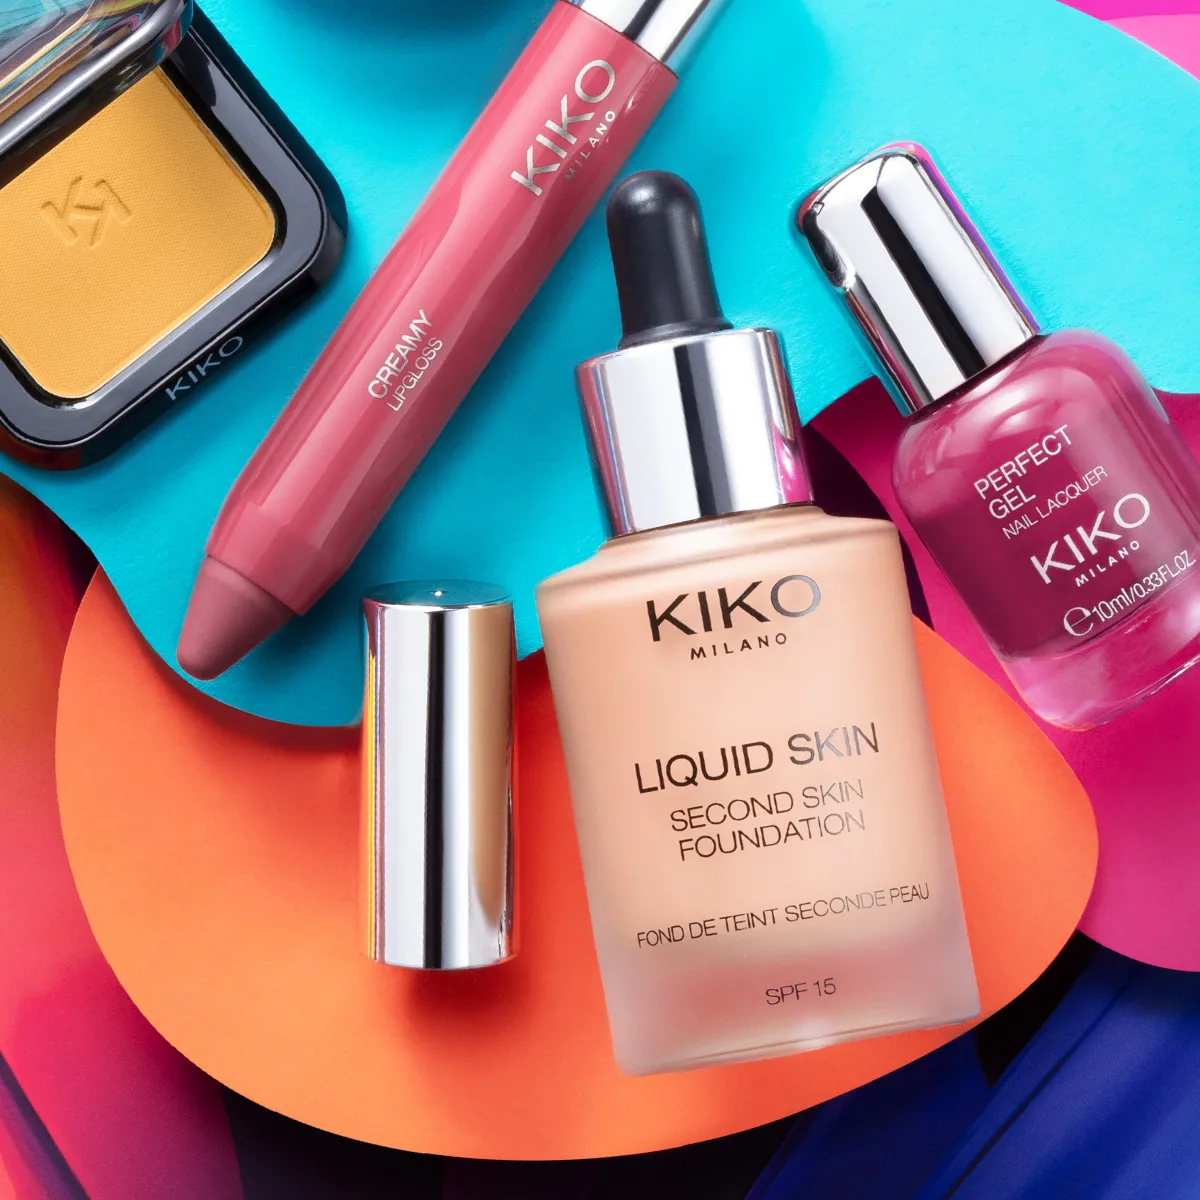 Up to 50% off sitewide at KIKO